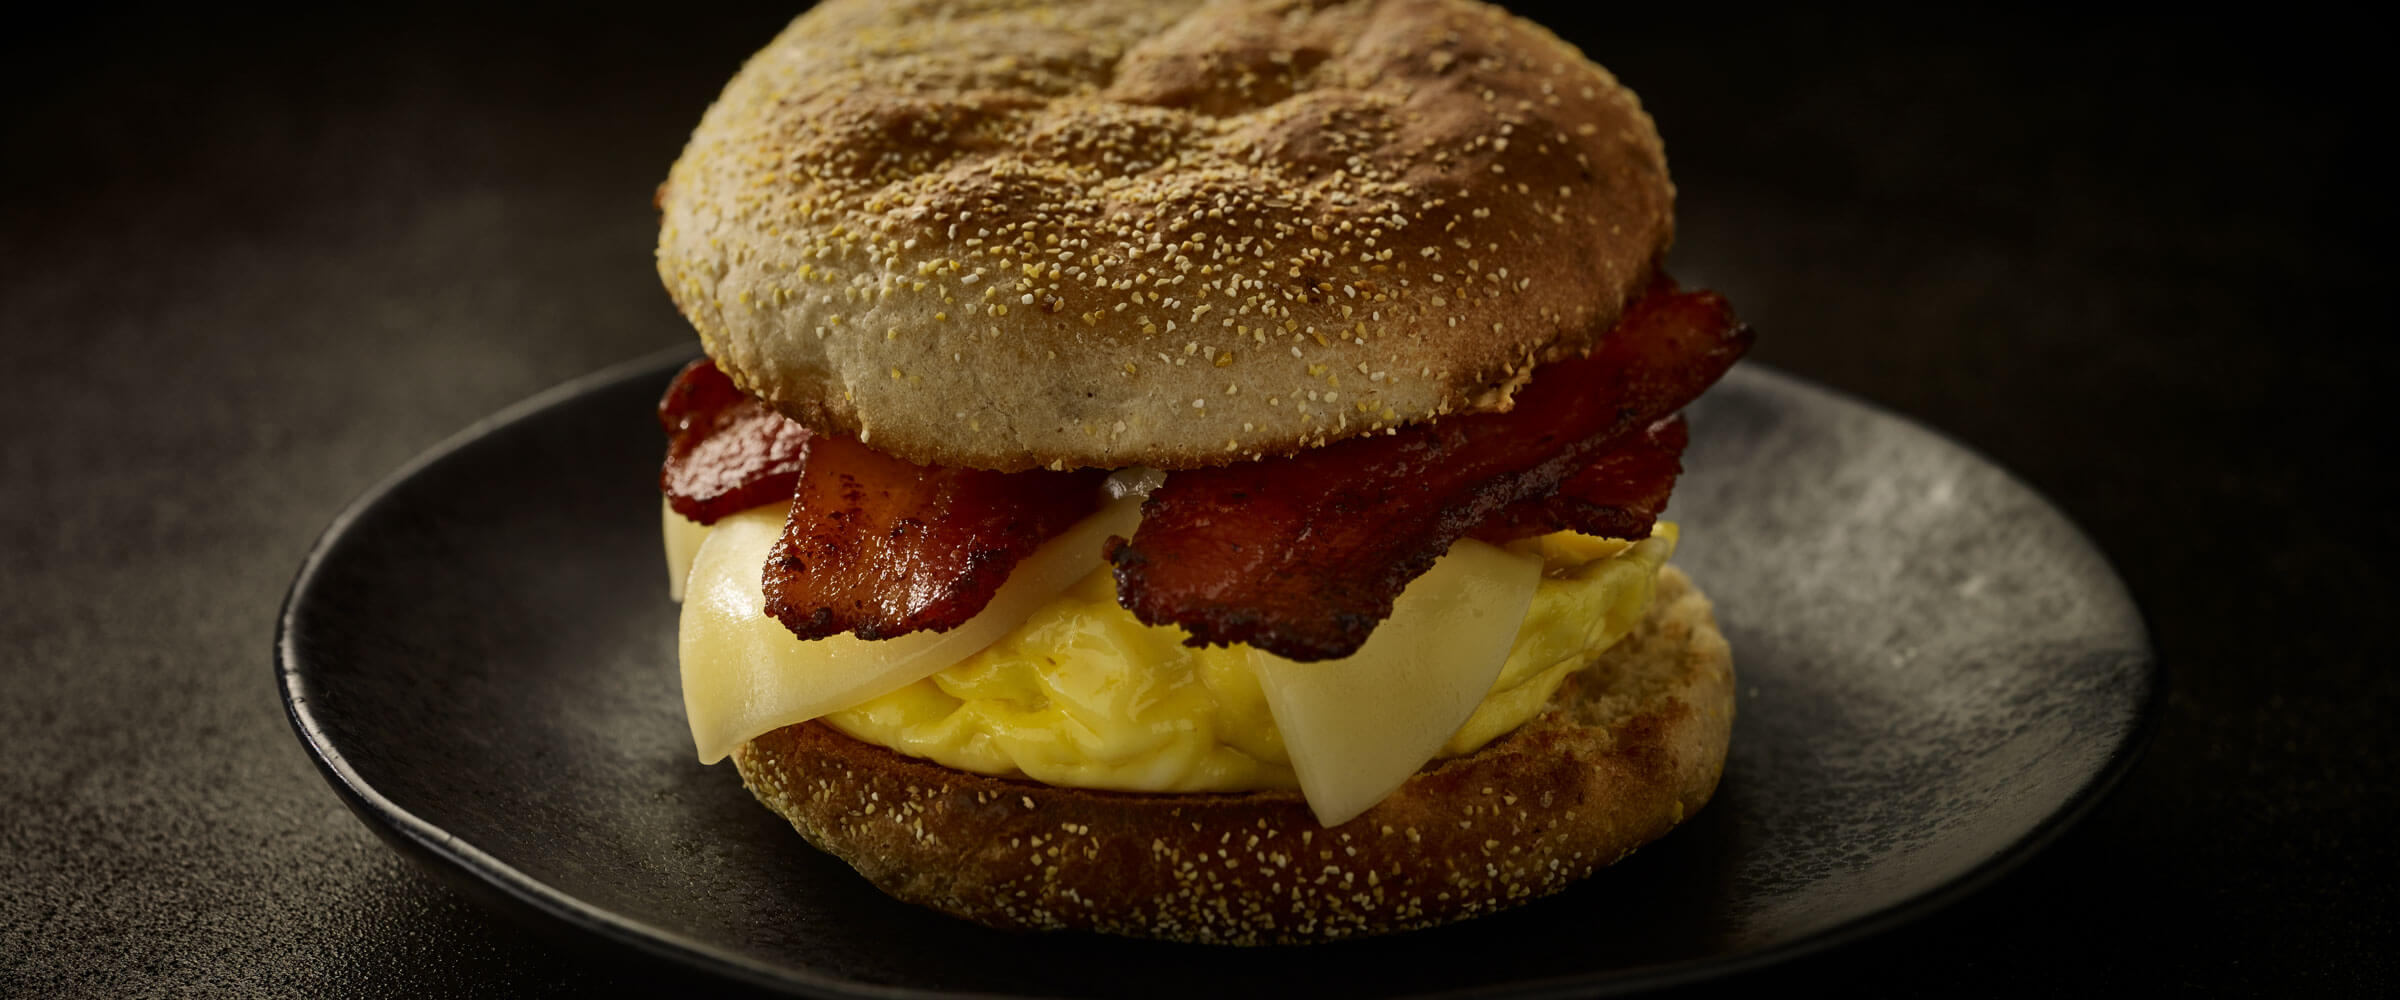 Bacon and English Muffin Sandwich with egg on black plate